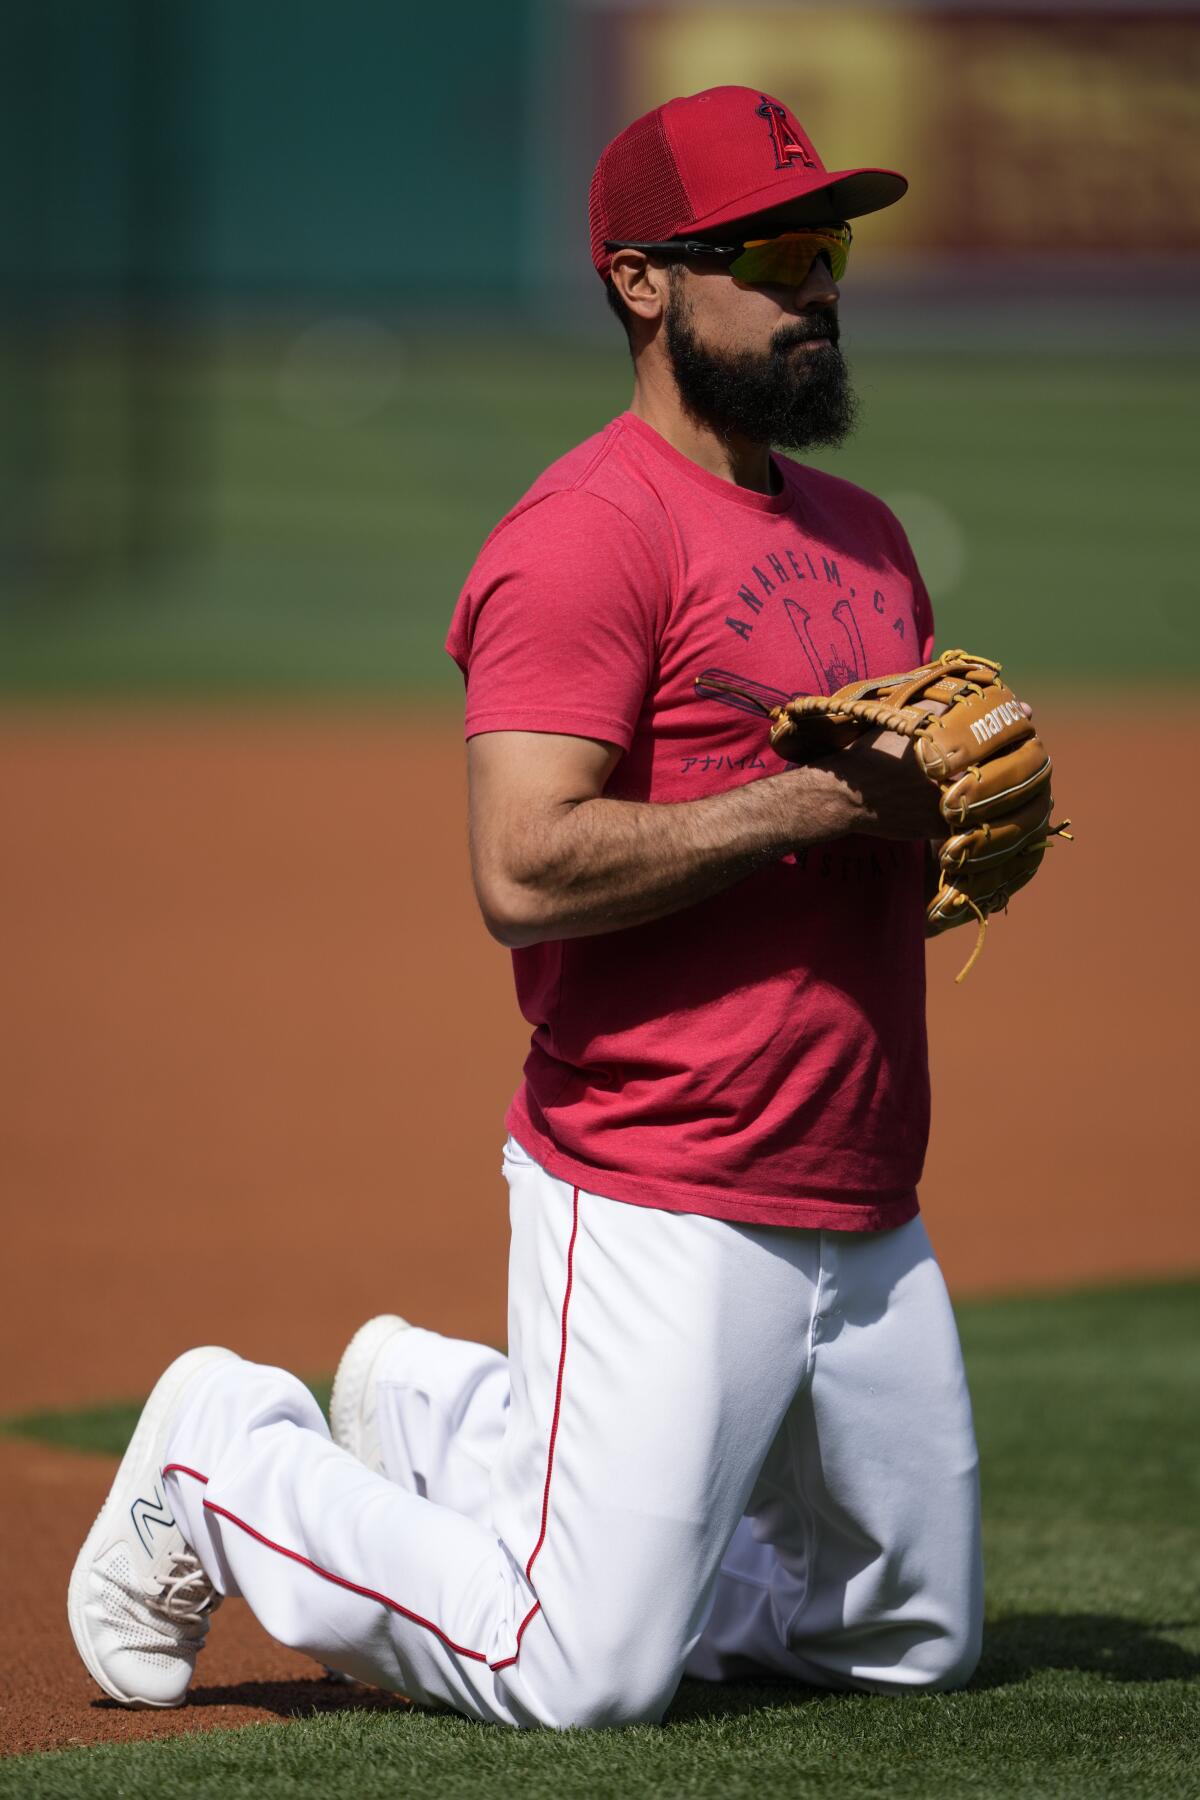 Angels third baseman Anthony Rendon participates in batting practice before a game at Angel Stadium.